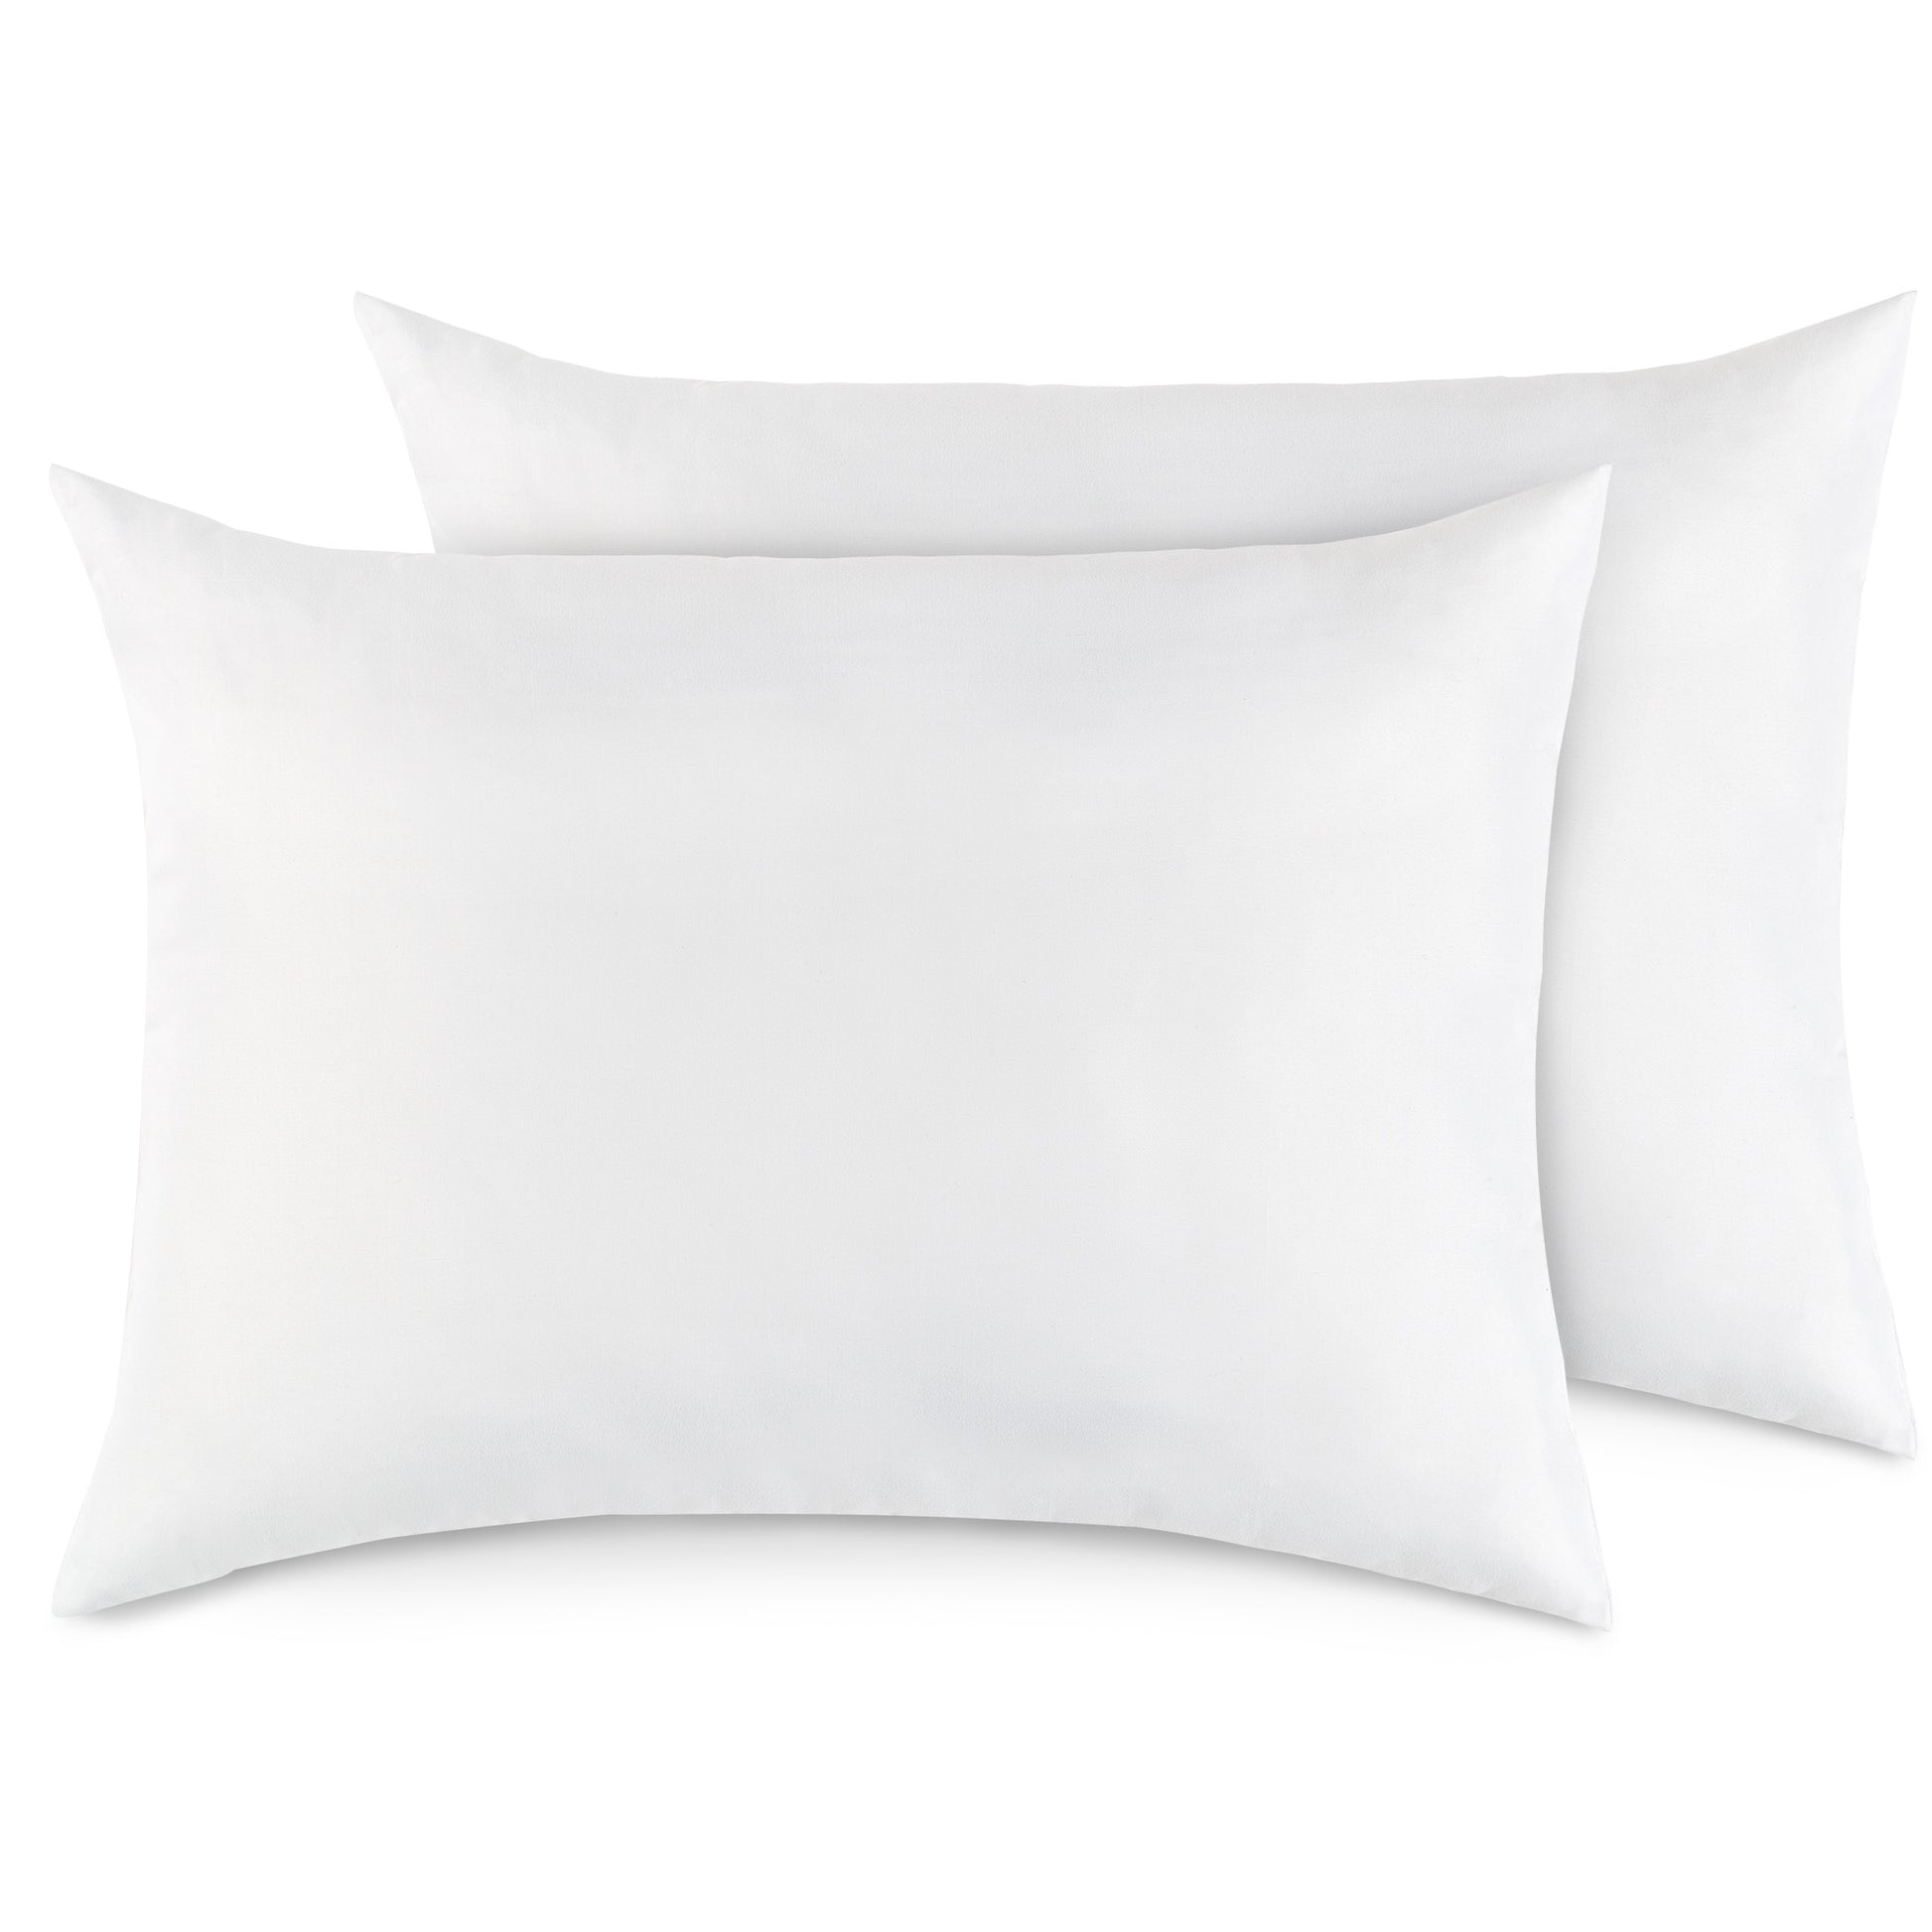 Woven 2 Piece Hotel Collection Bed Pillow, Queen Size. Designed for Back, Stomach or Side Sleepers, 18x24